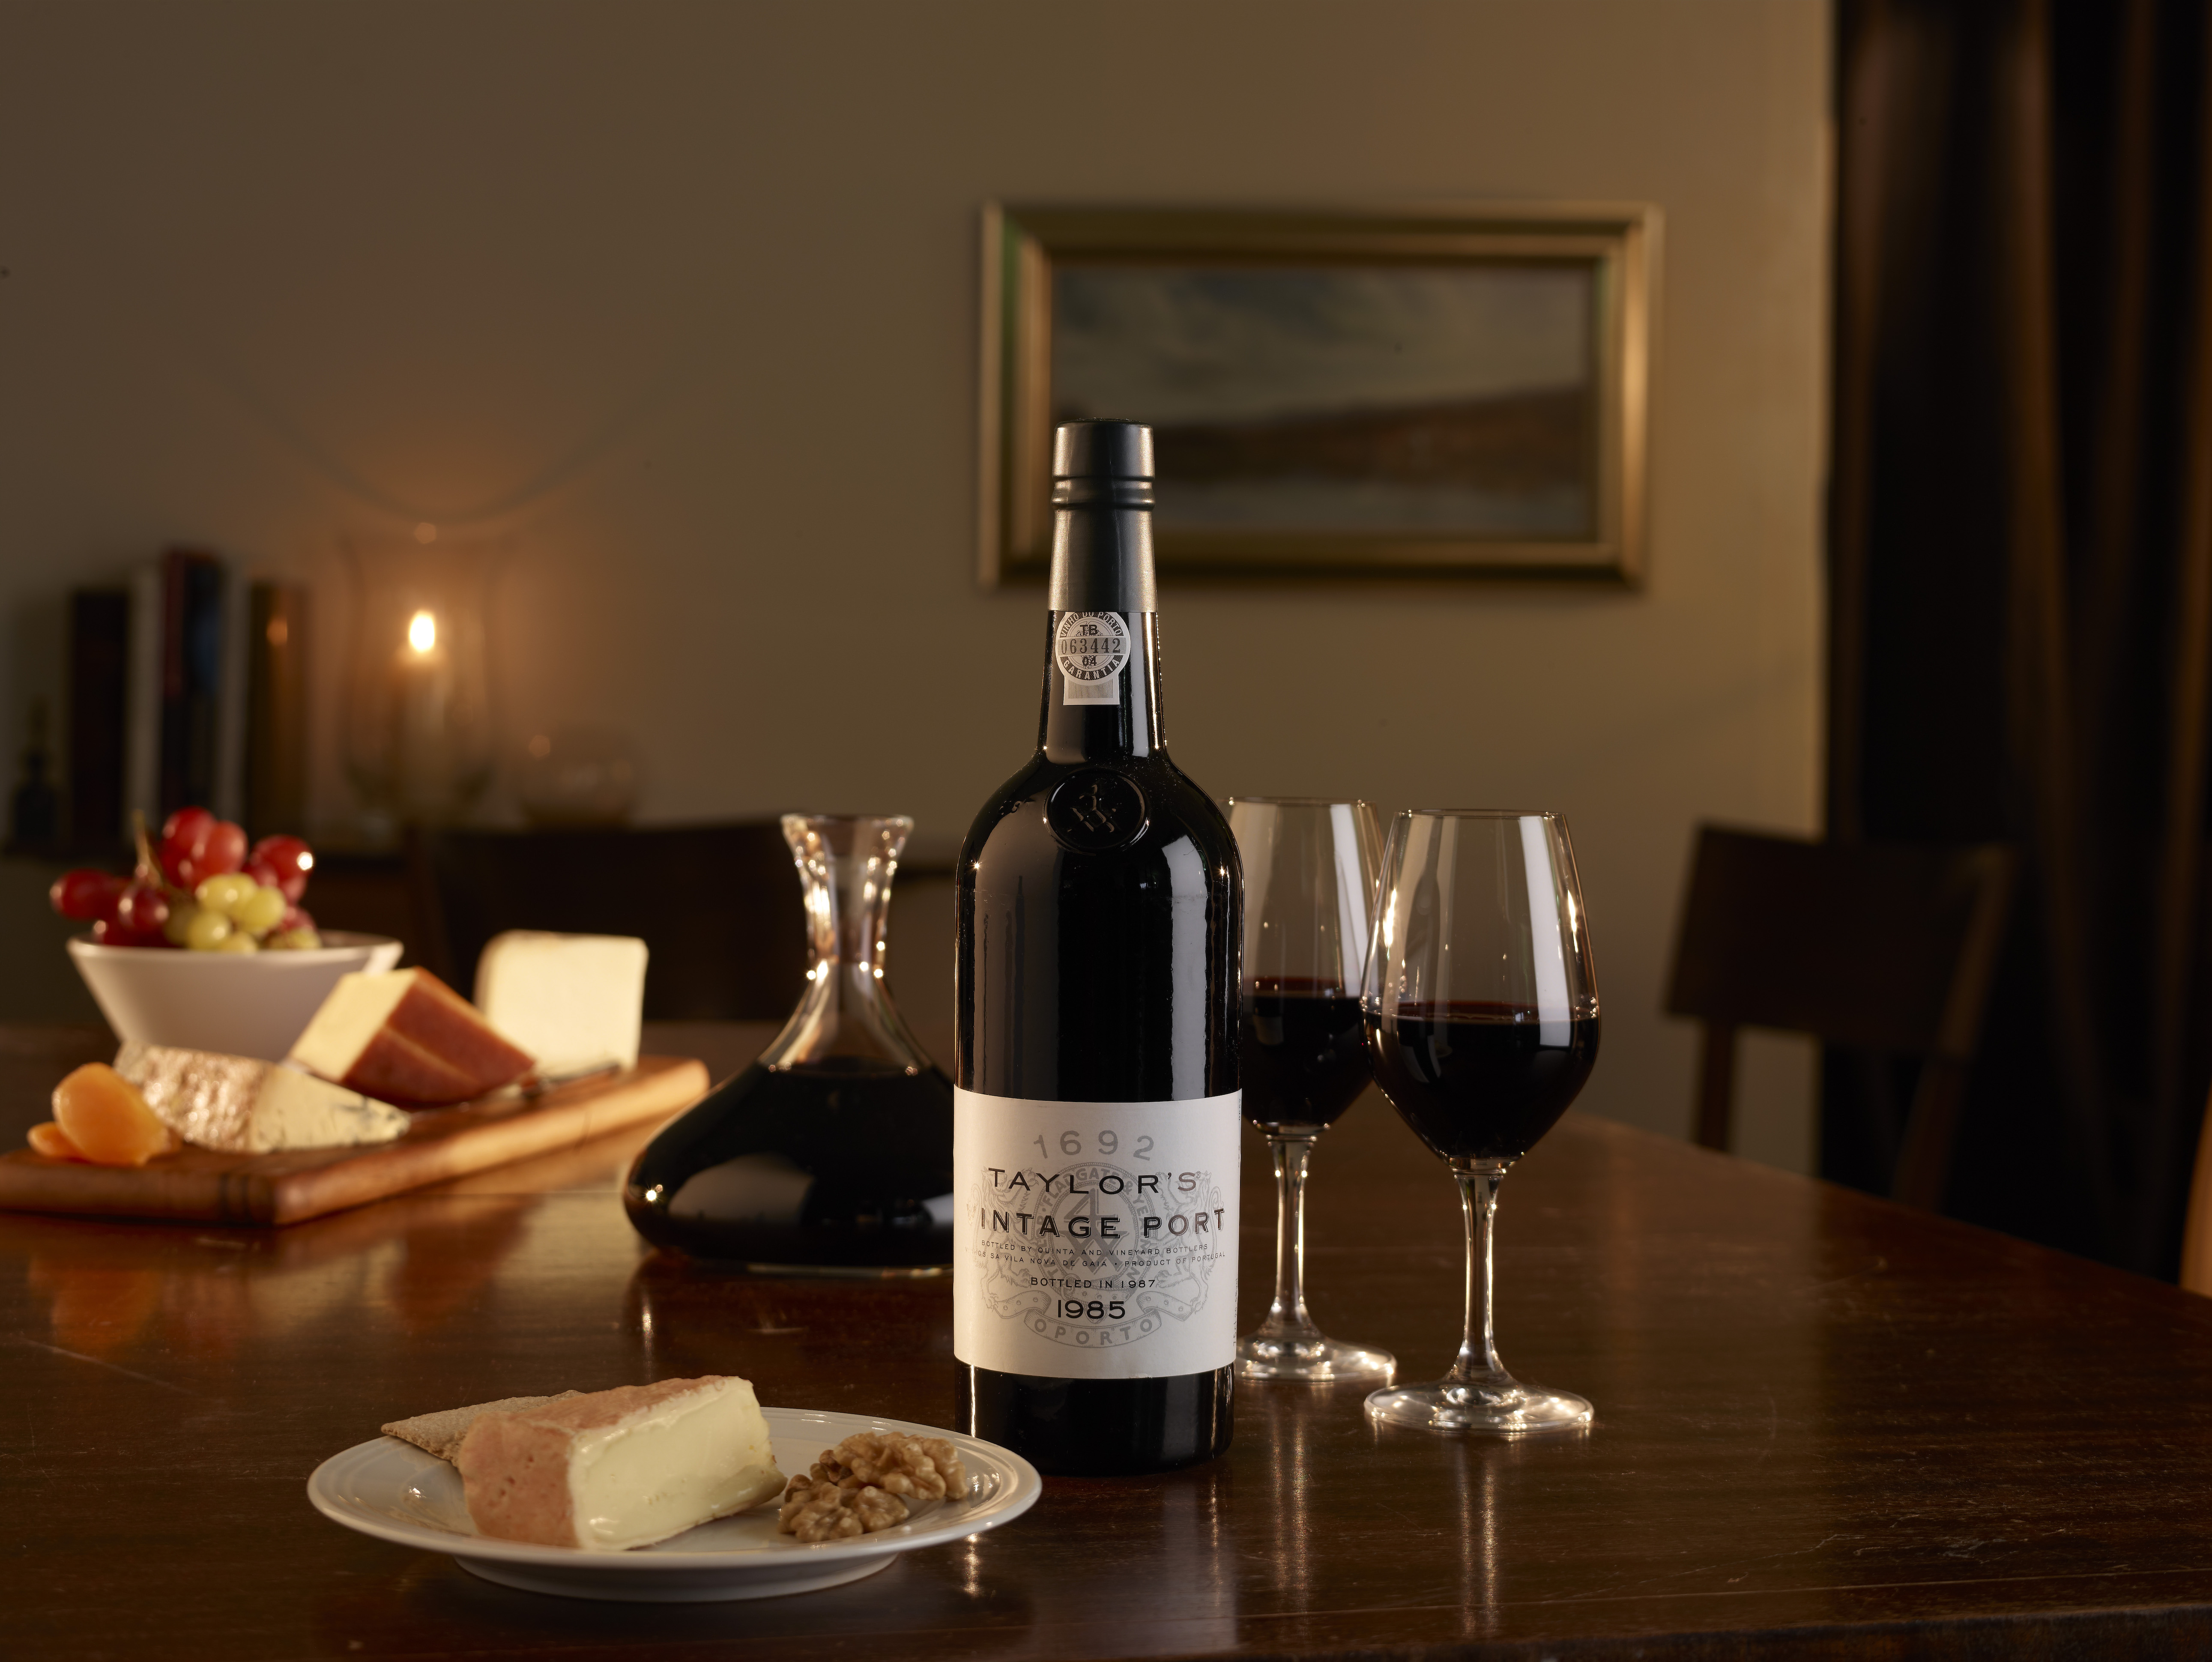 Port & cheese unexpected pairings